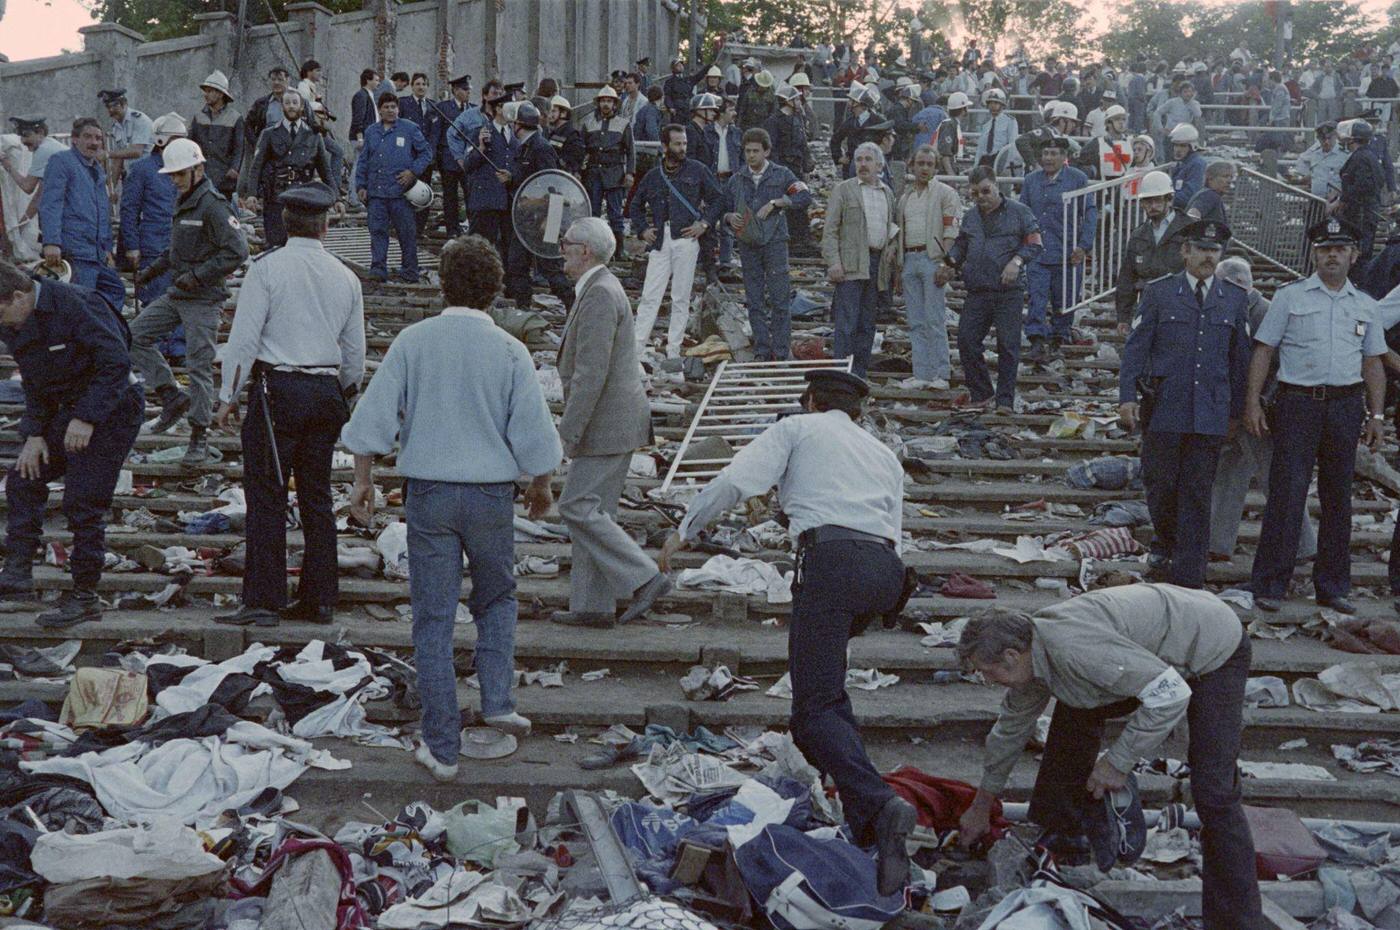 Rescuers and police search for victims after Heysel Stadium disaster, European Cup Final, 1985.